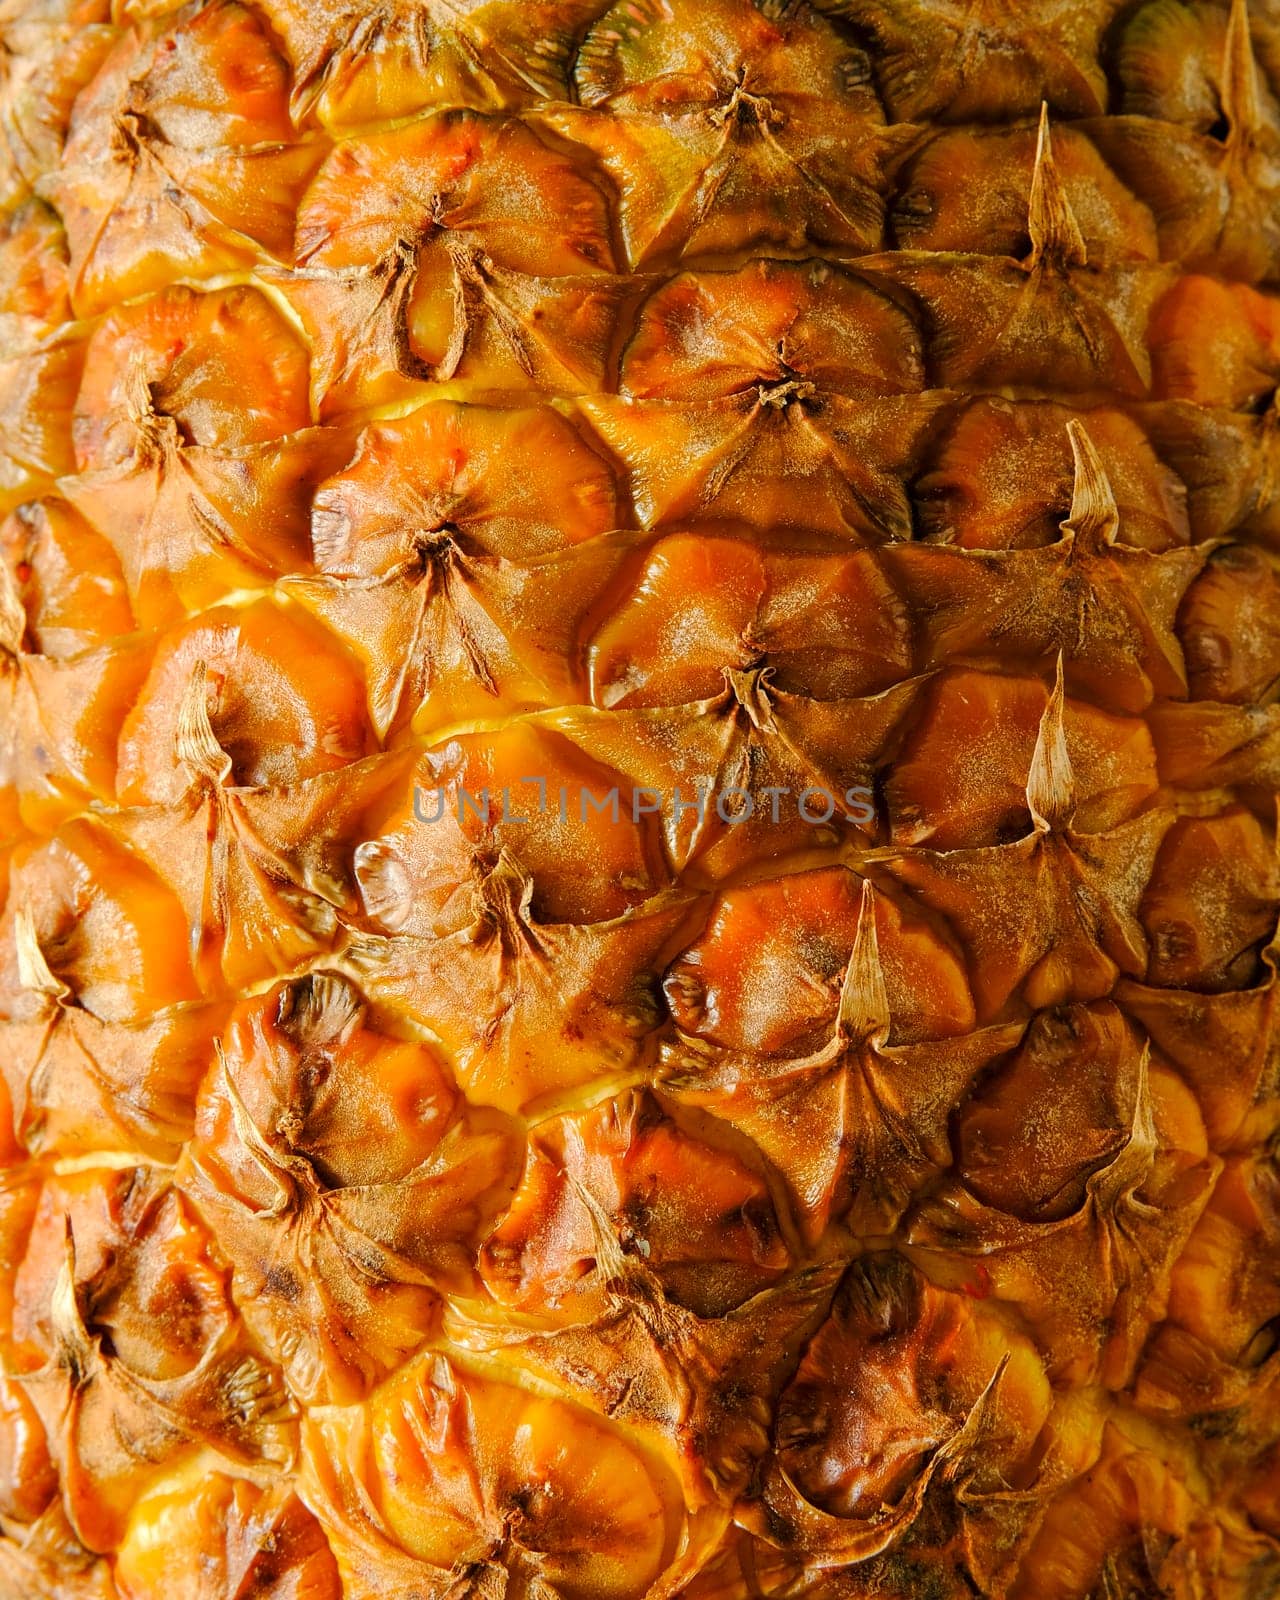 Pineapple peel texture full frame close-up. High quality photo